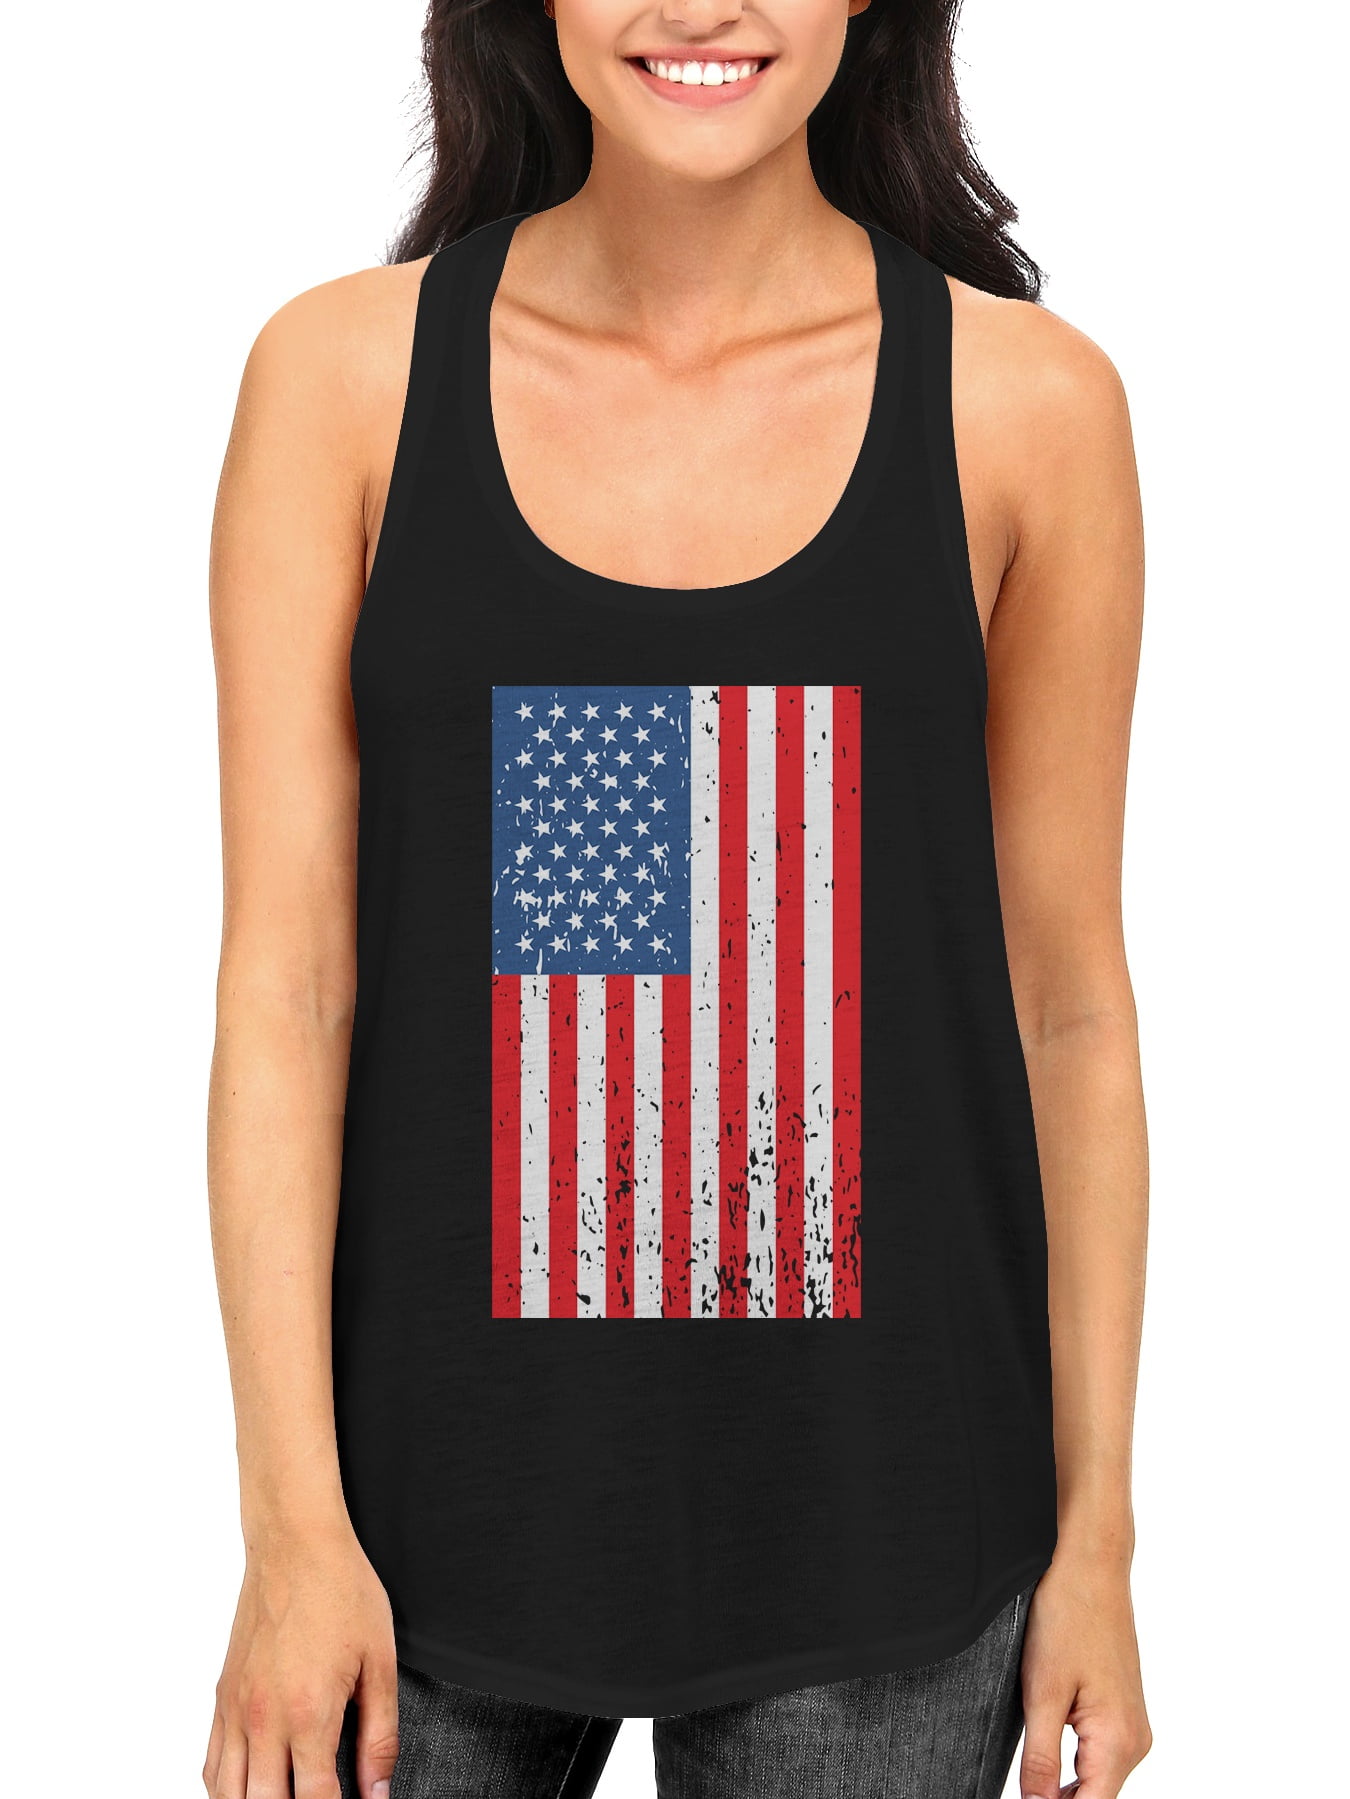 365 Printing - Distressed American Flag Black Women's Tank Tops for ...